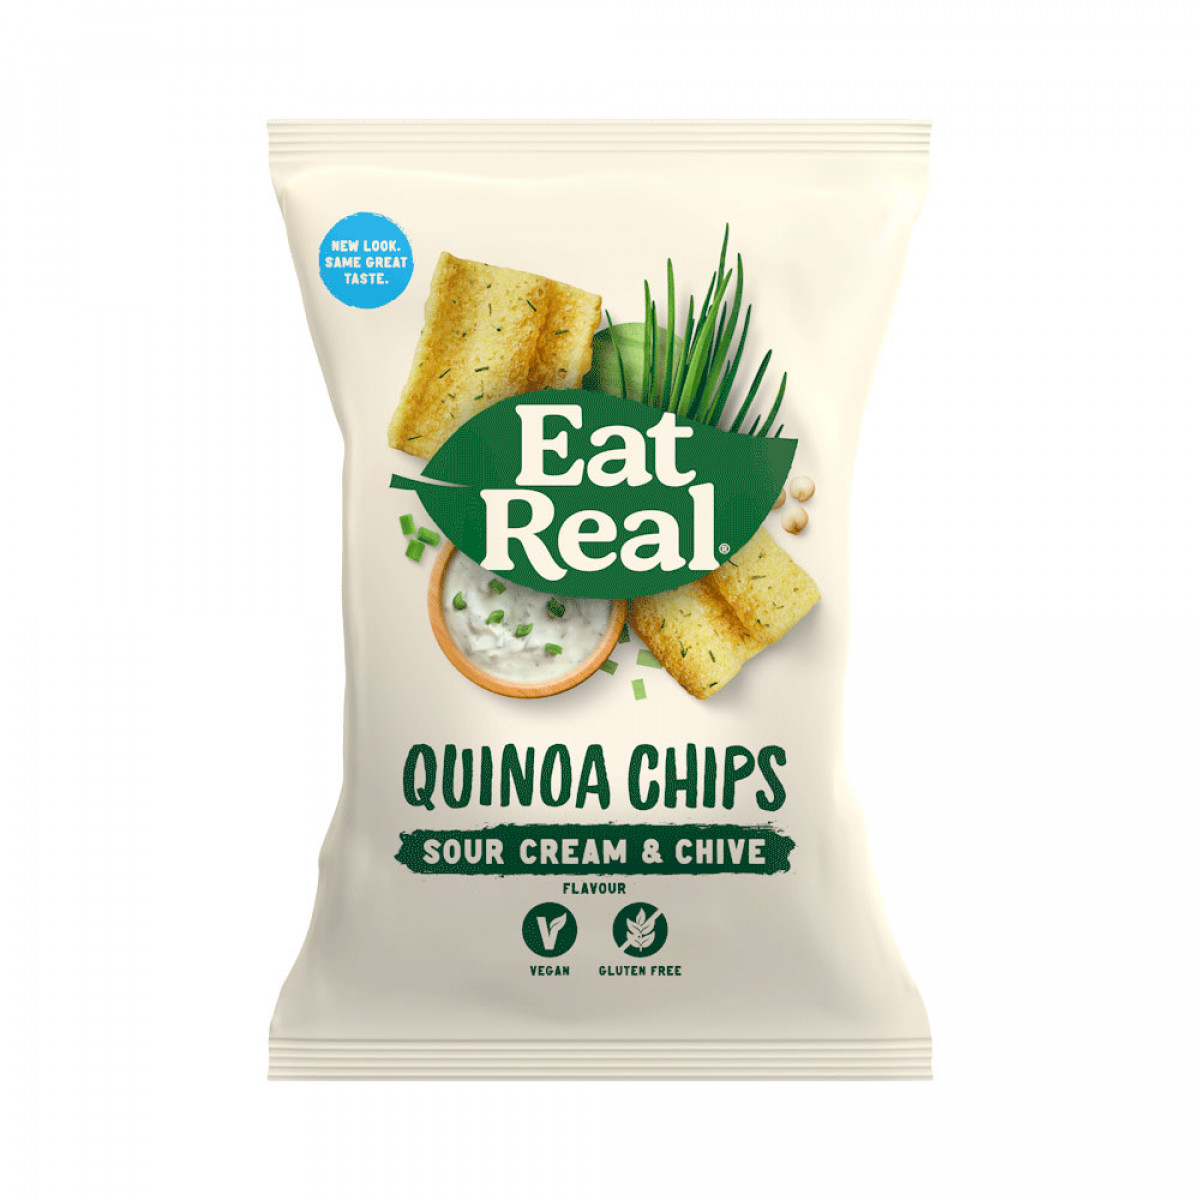 Product picture for Quinoa Chips Sour Cream & Chive